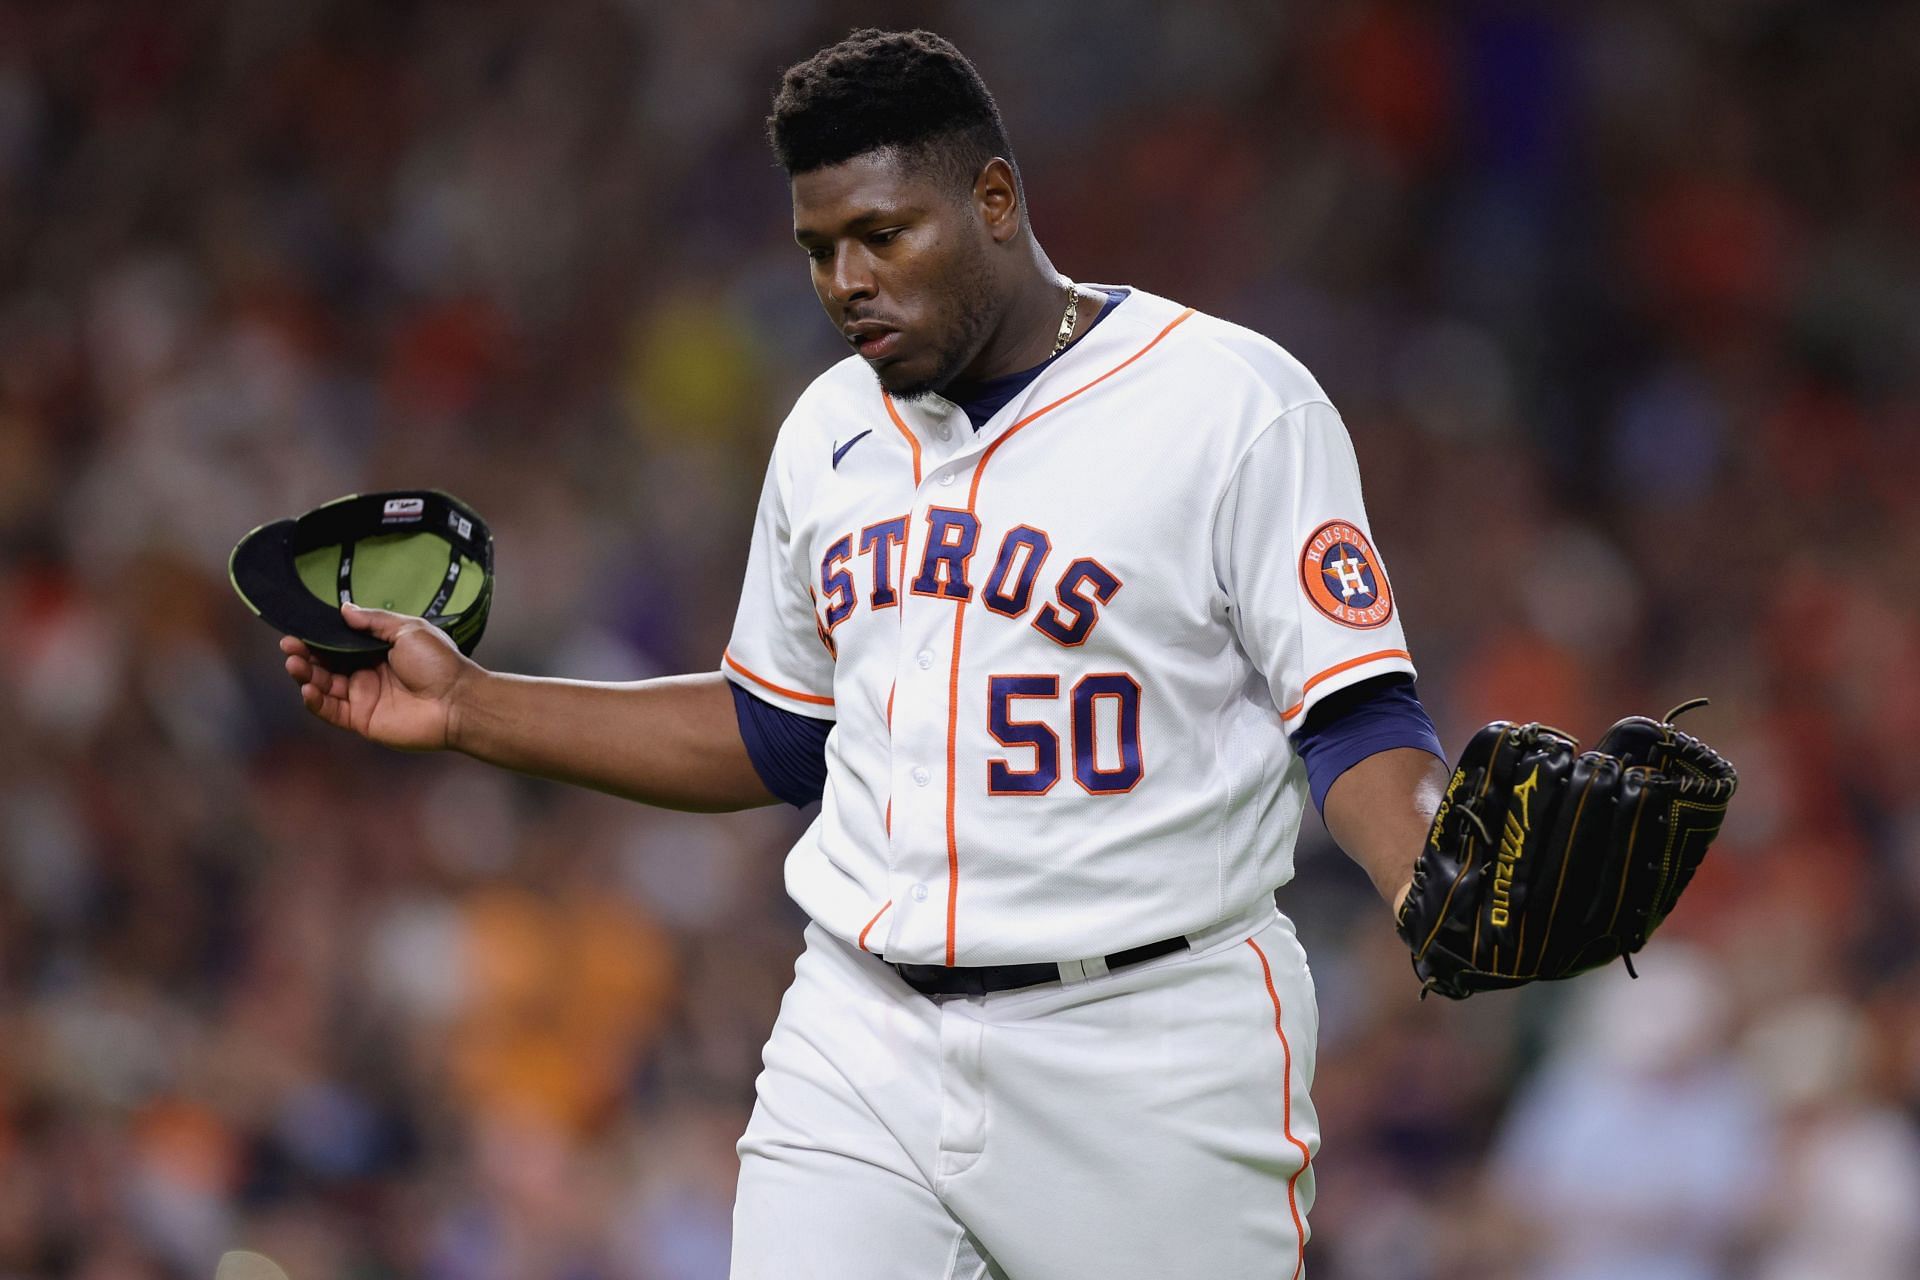 Hector Neris has never had higher trade value than right now